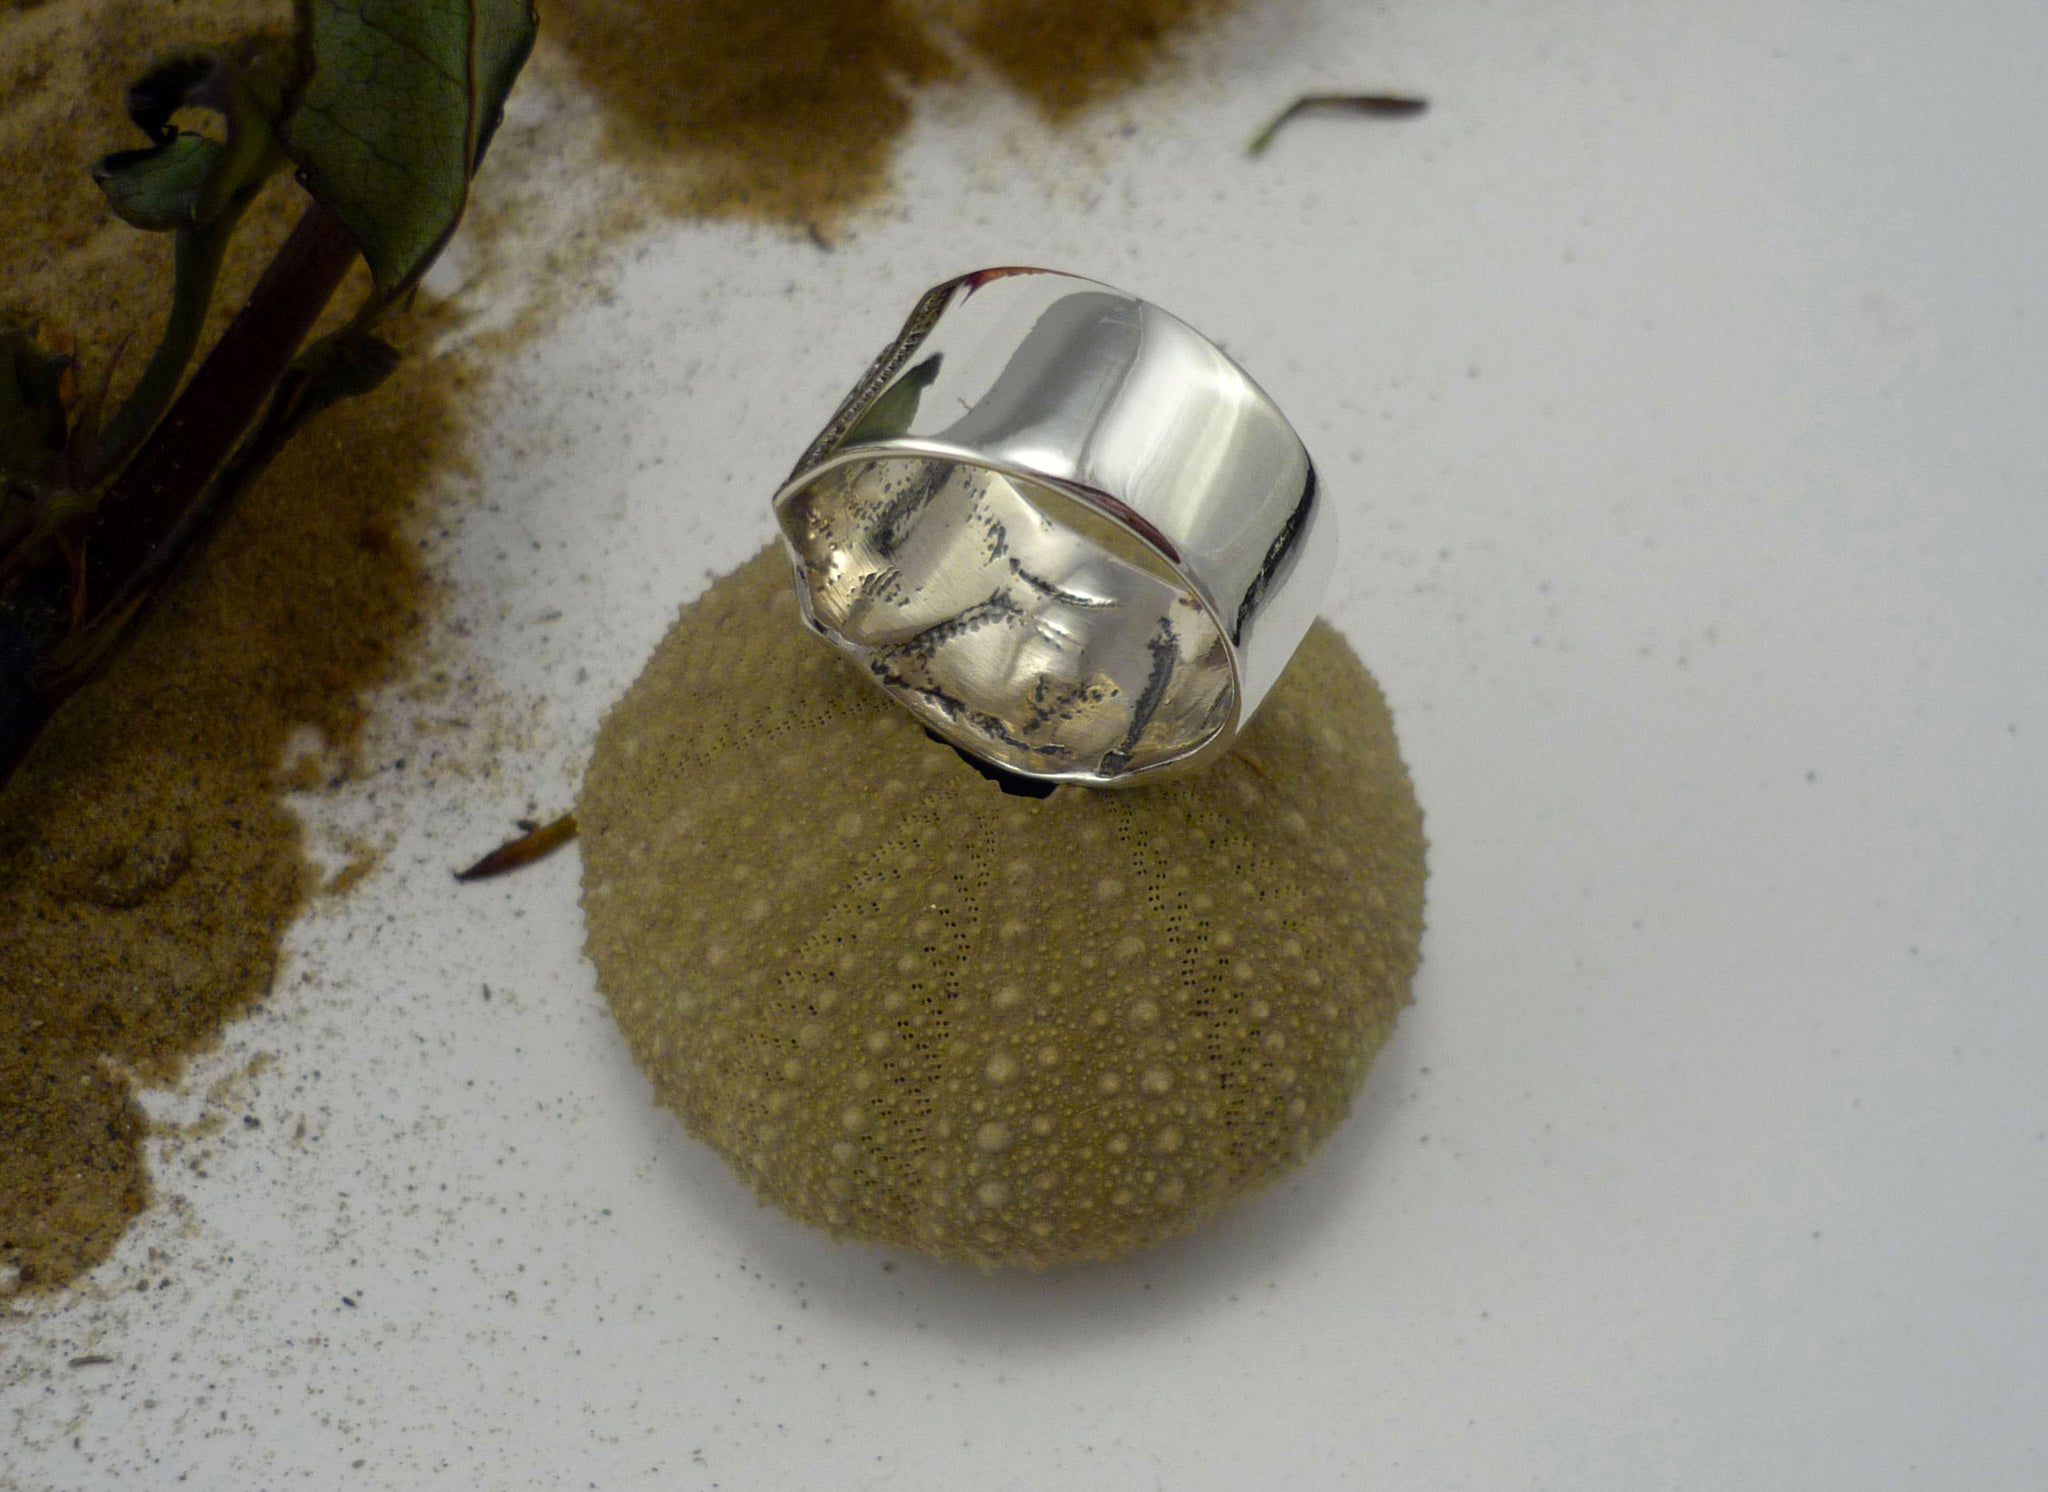 SEA URCHIN IMPRINT BAND RING, unisex wide necklace with beautiful lace made from a sea urchin shell cast